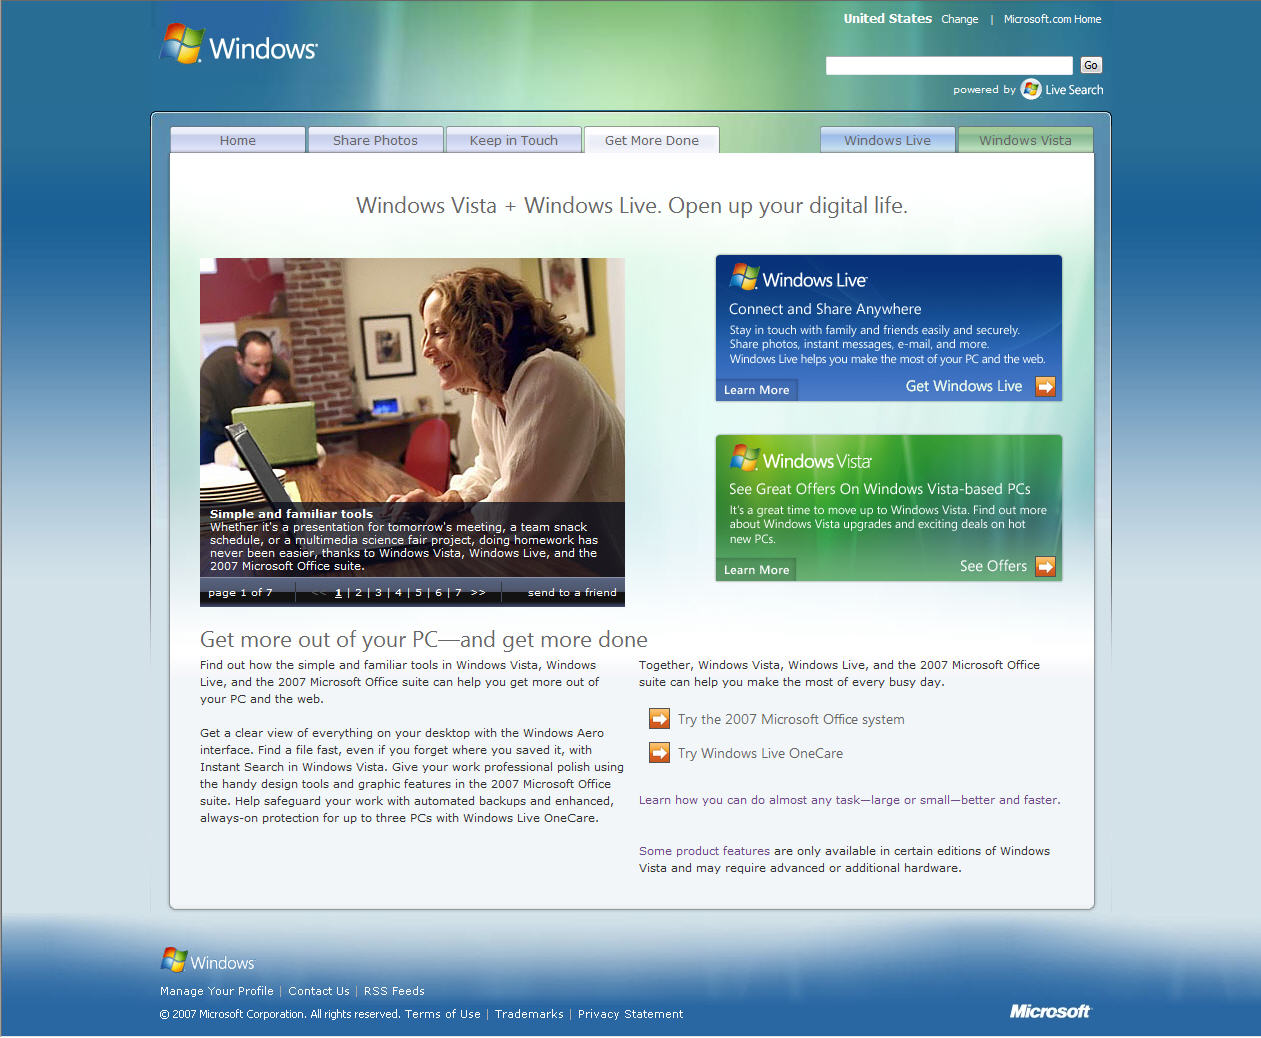 Microsoft's Windows Live finally starting to come into its own